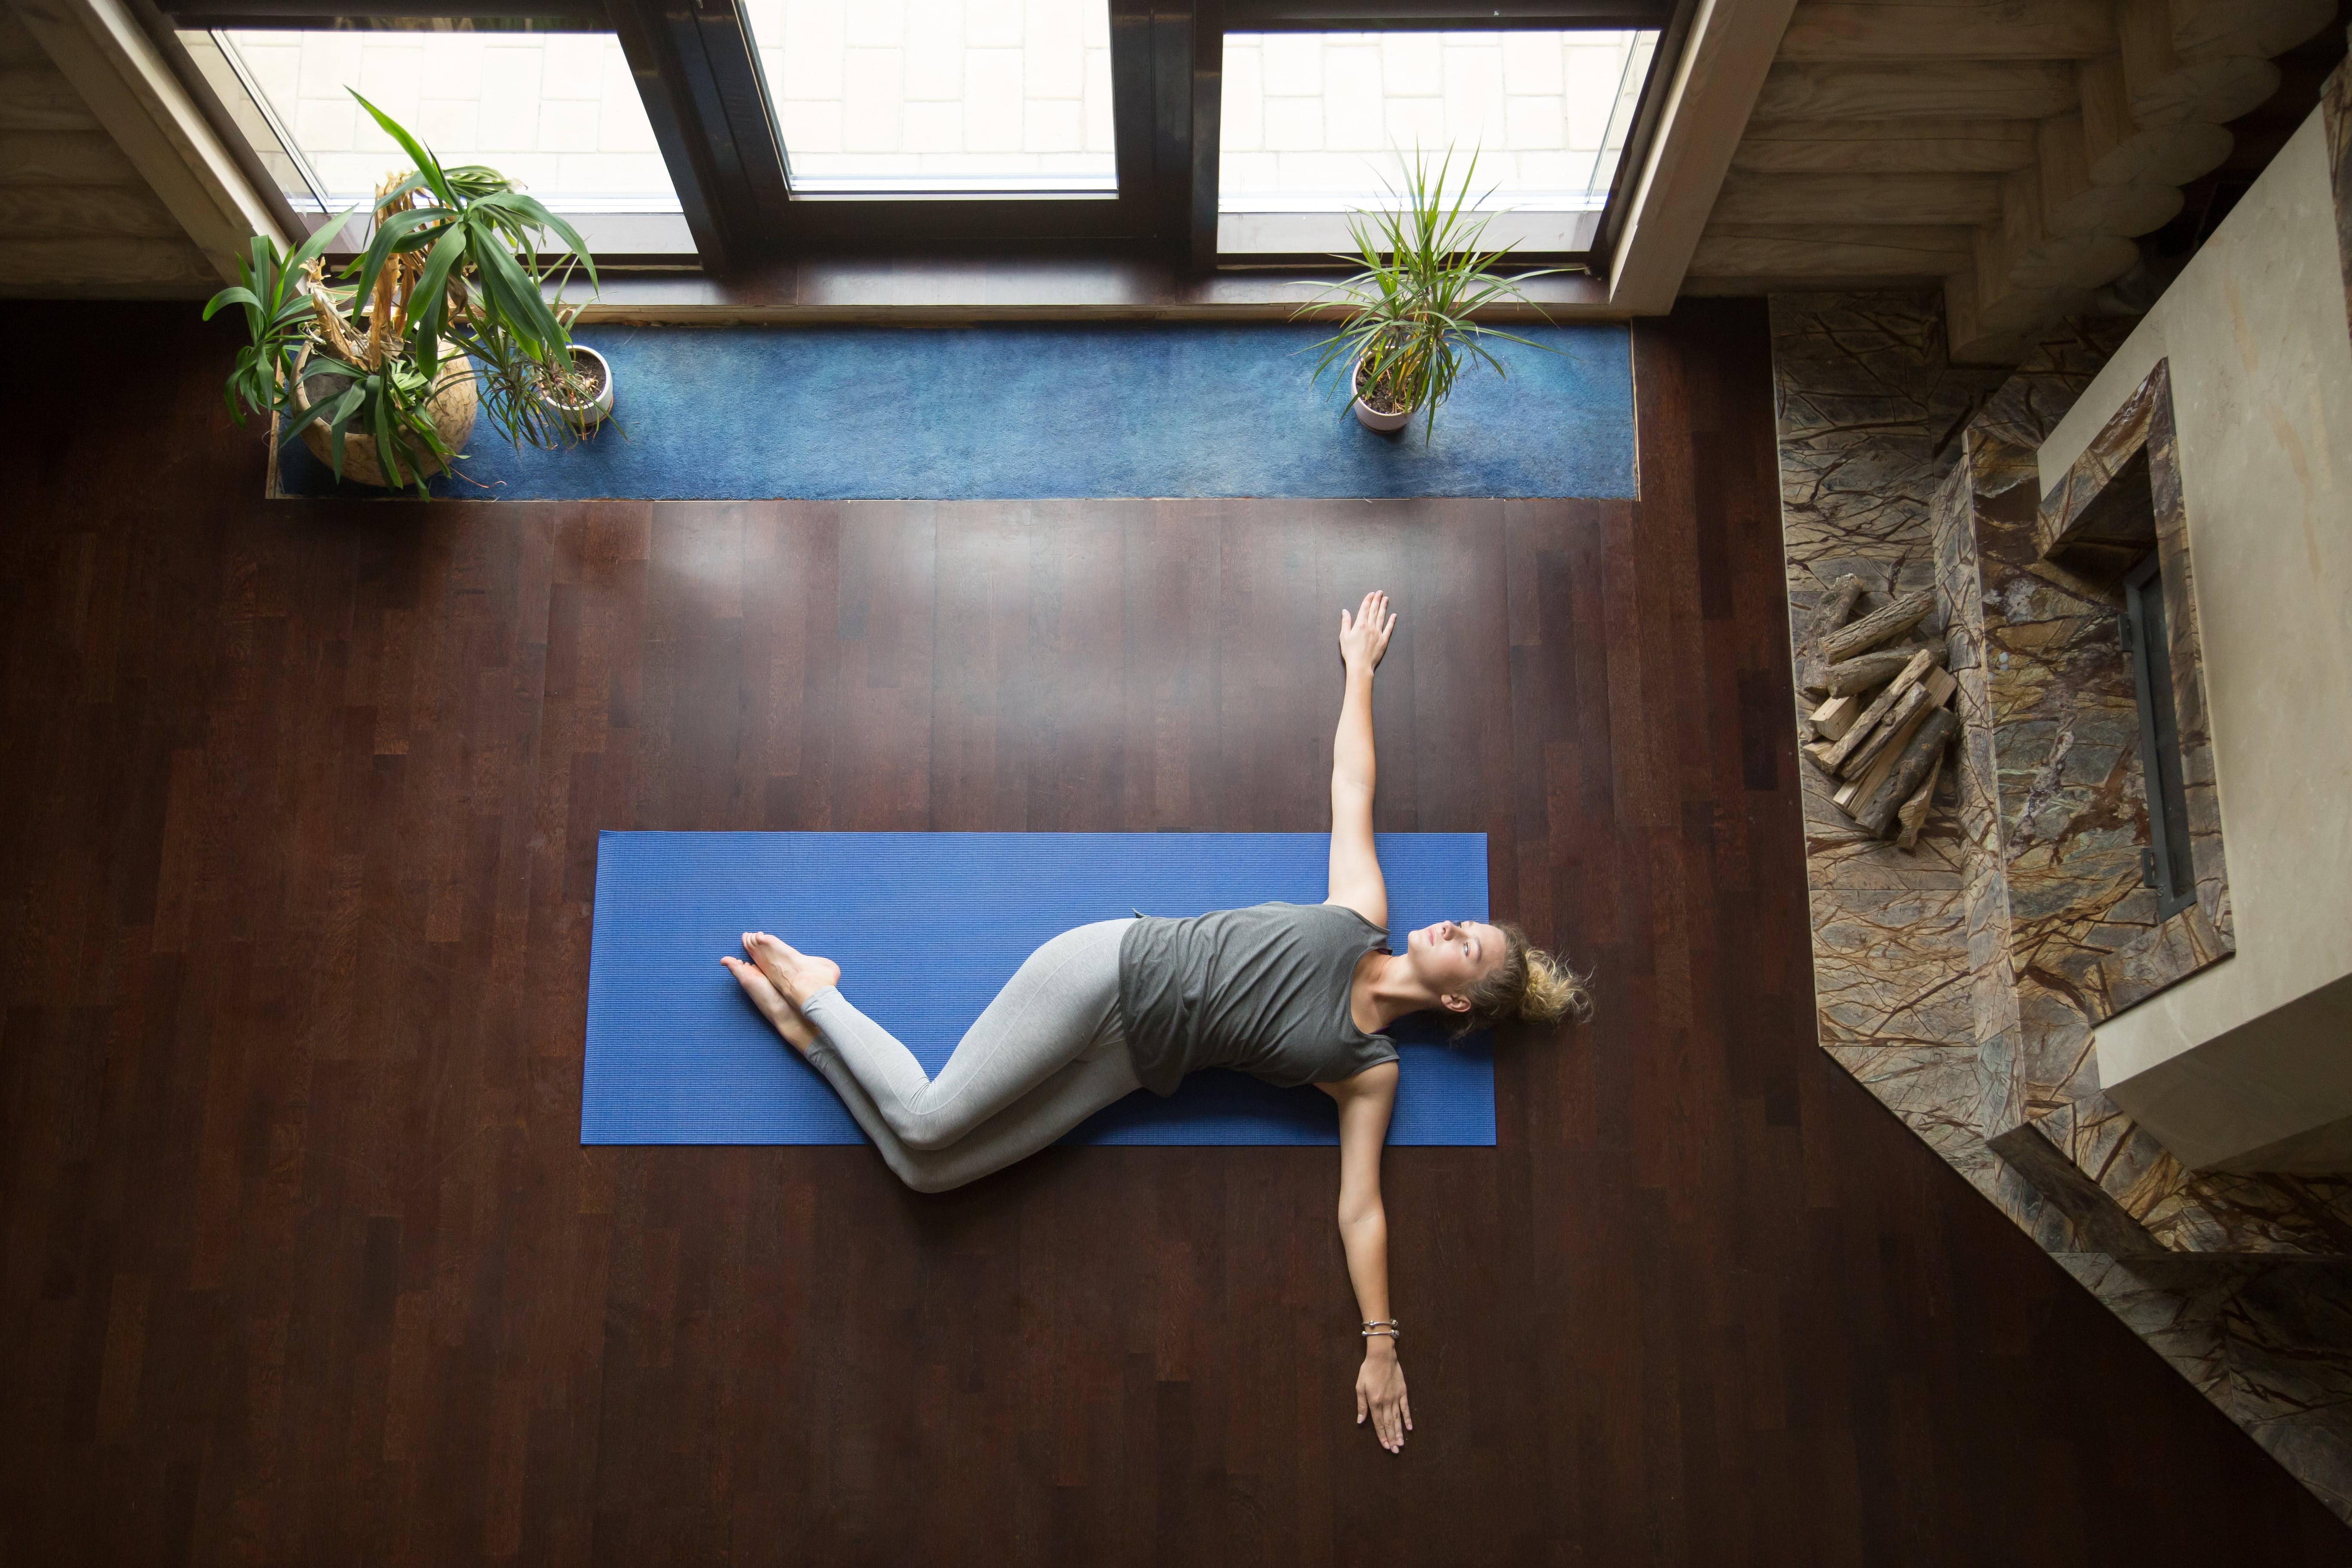 A lady practicing the supine twist yoga pose. The photo is taken from an aerial view and a stone fireplace and several house plants enhance the calming visual